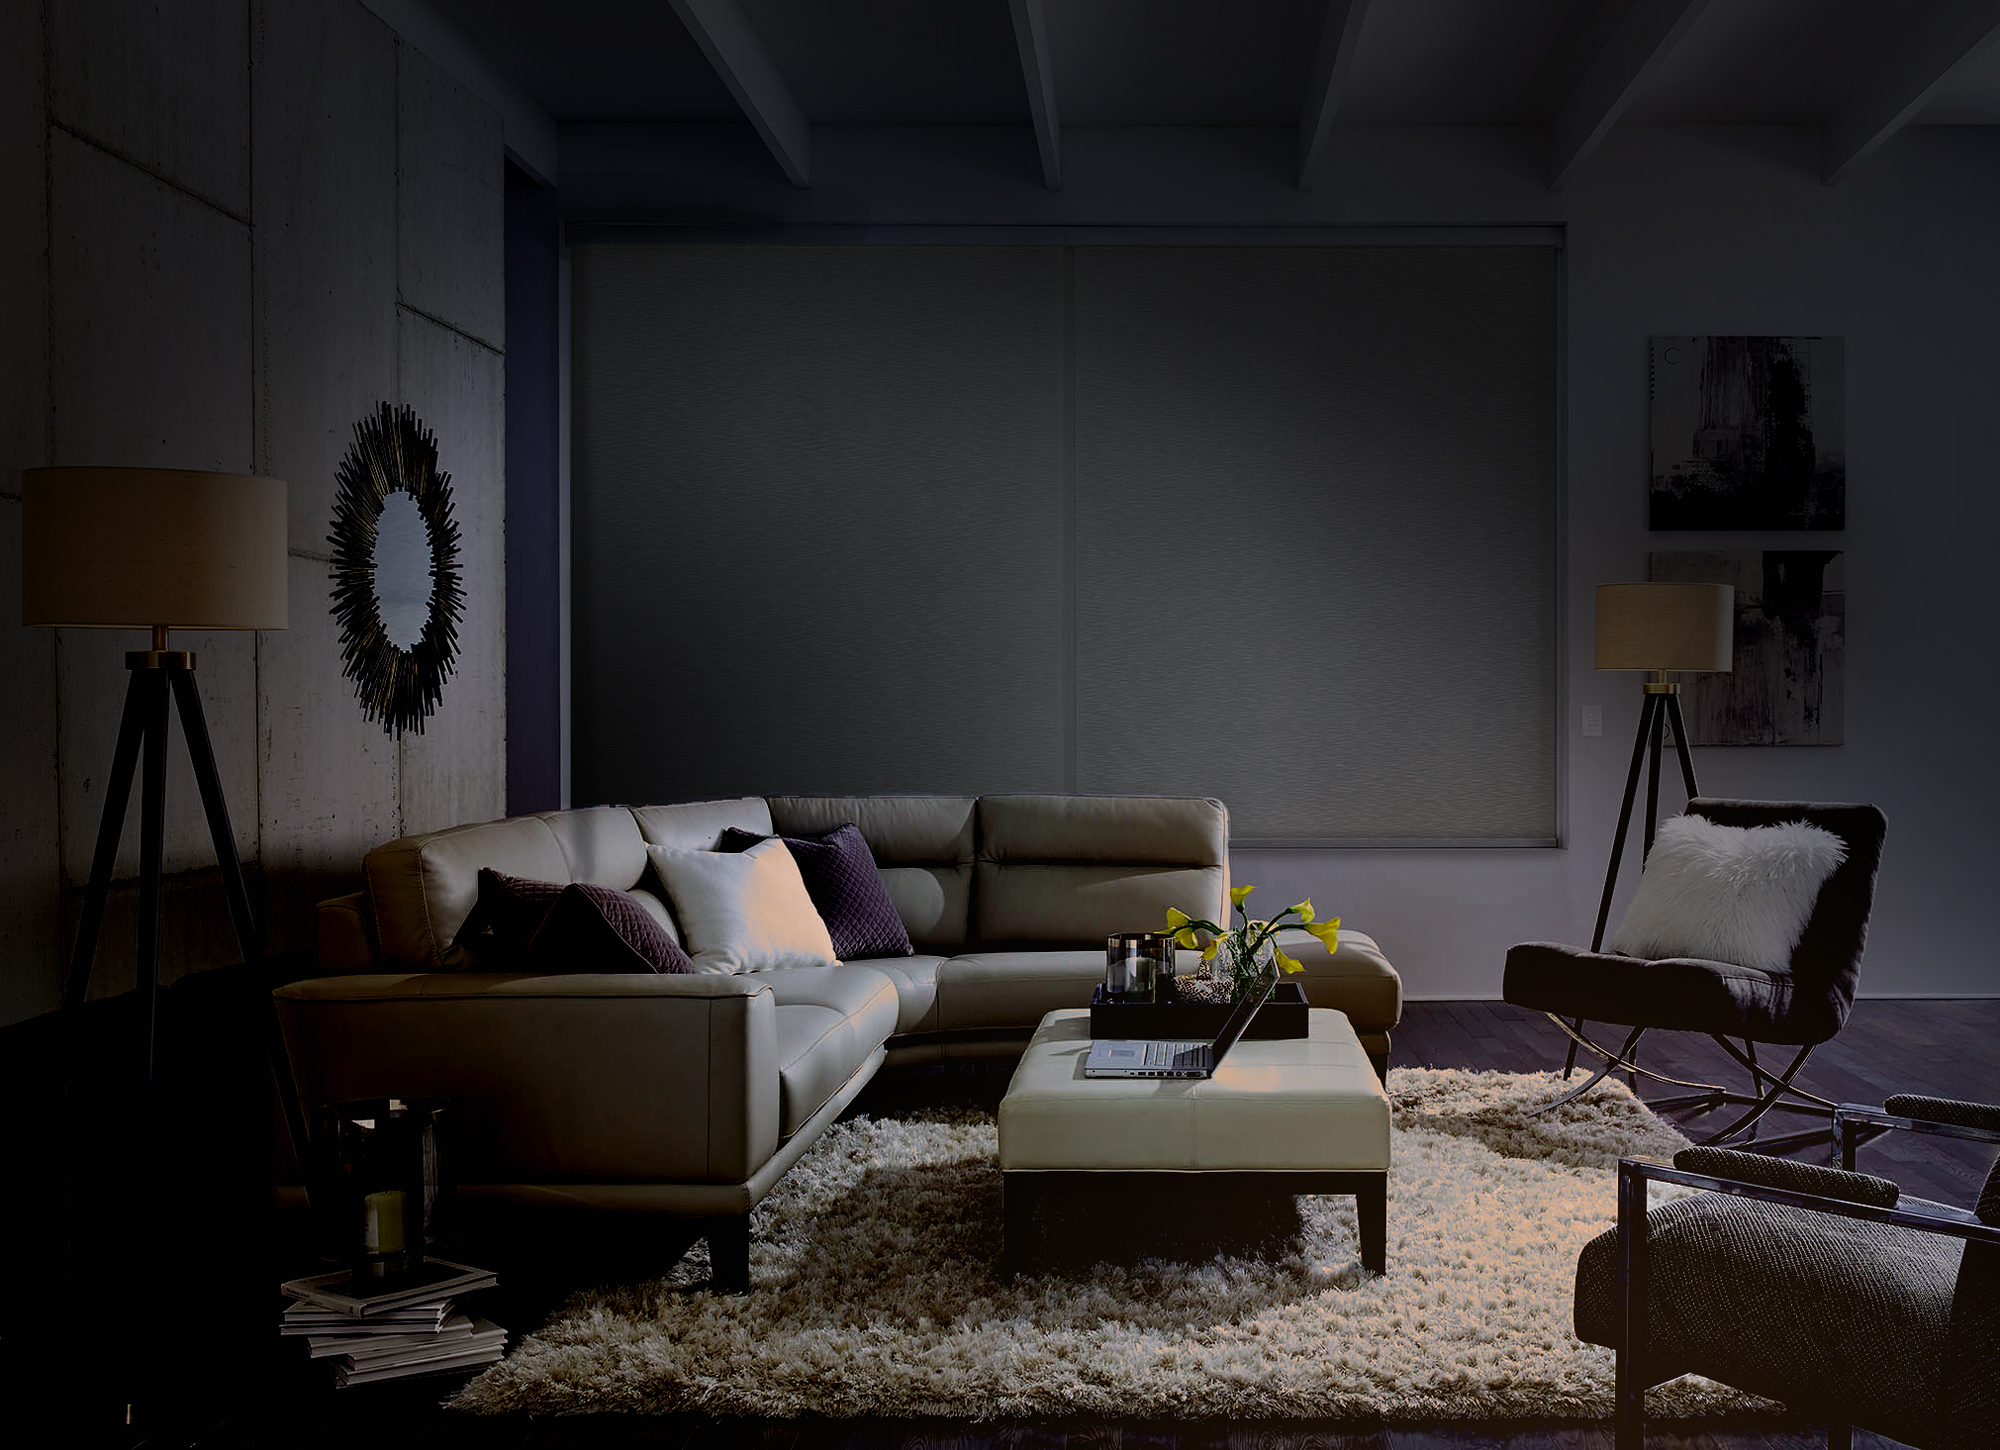 Image of a living room with movie night lighting